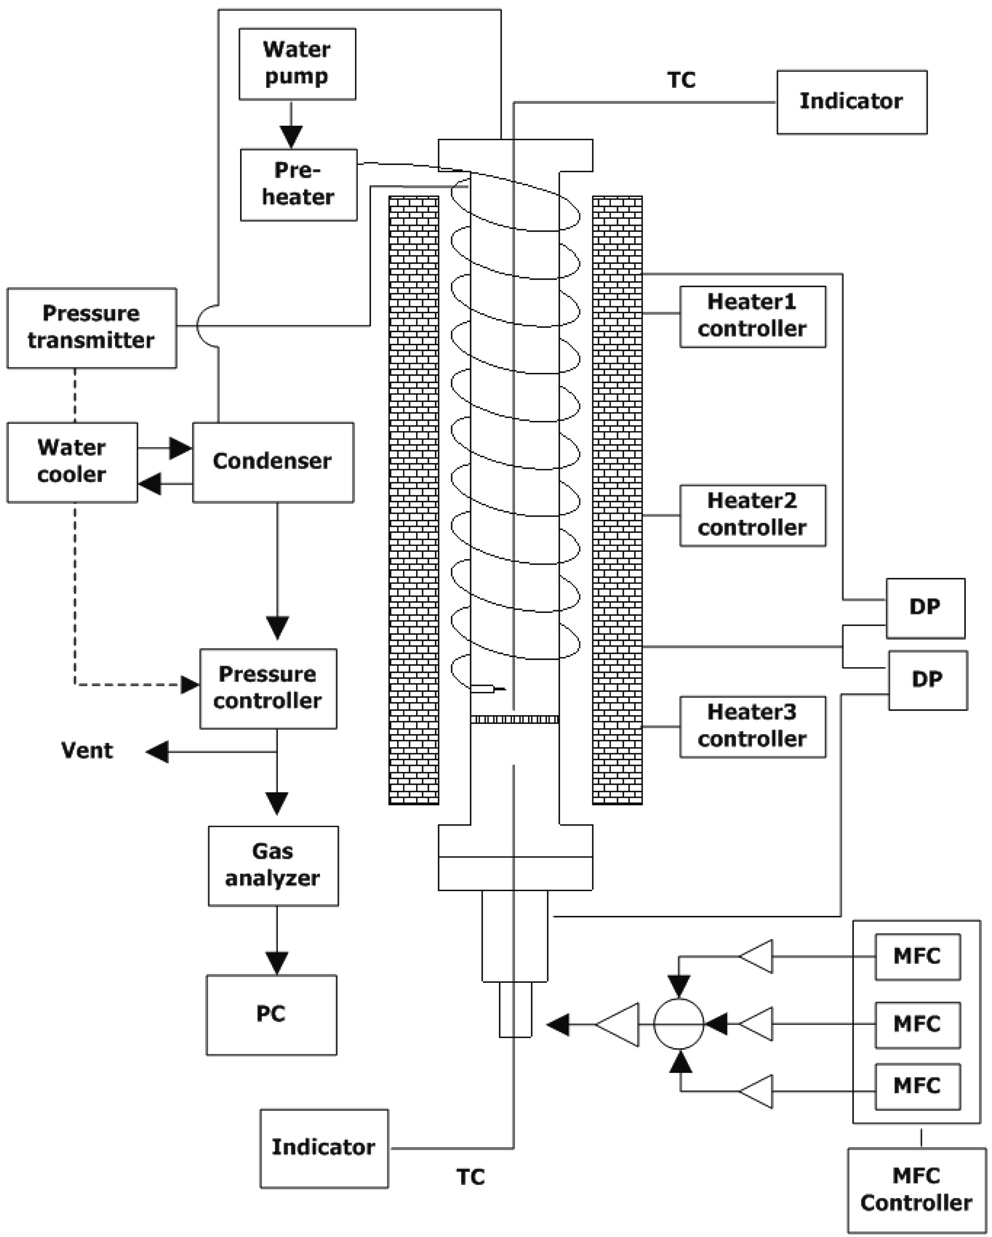 Schematic of pressurized fluidized bed reactor (0.05 m I.D.).